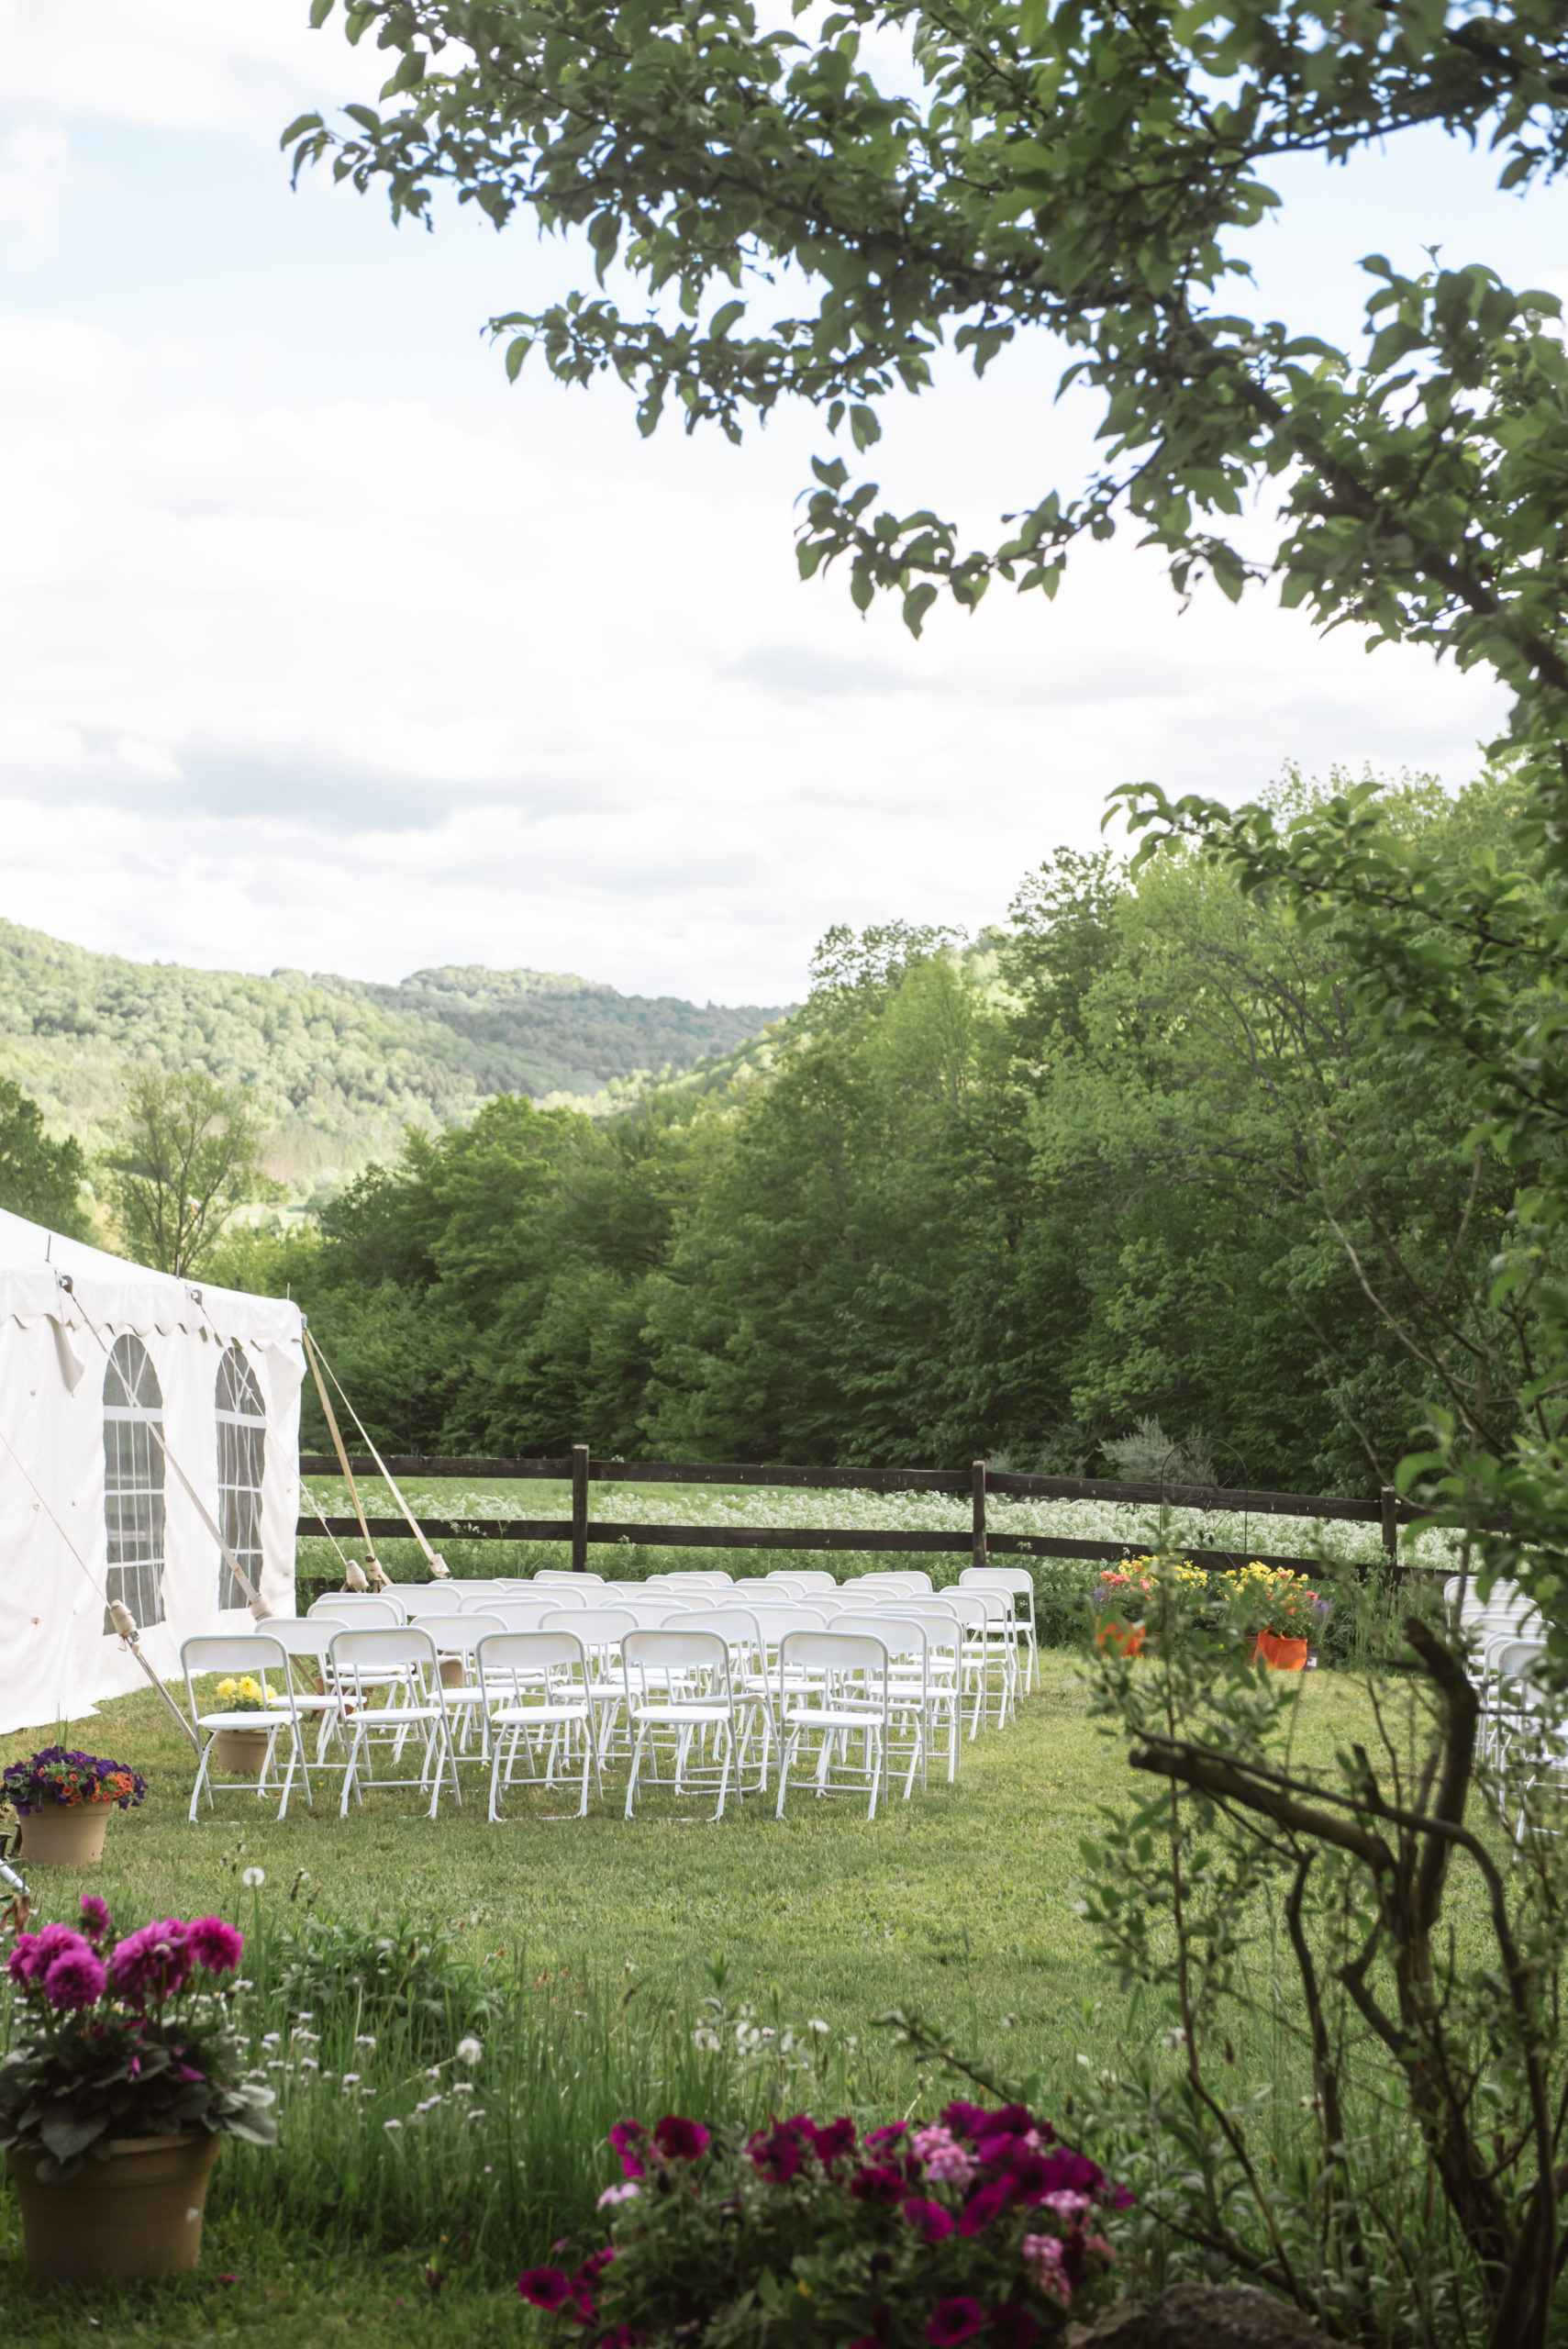 Ceremony seats lined up in a field next to a white tent and in front of a dark wooden fence. There is a white floral field, trees, and mountains in the background.